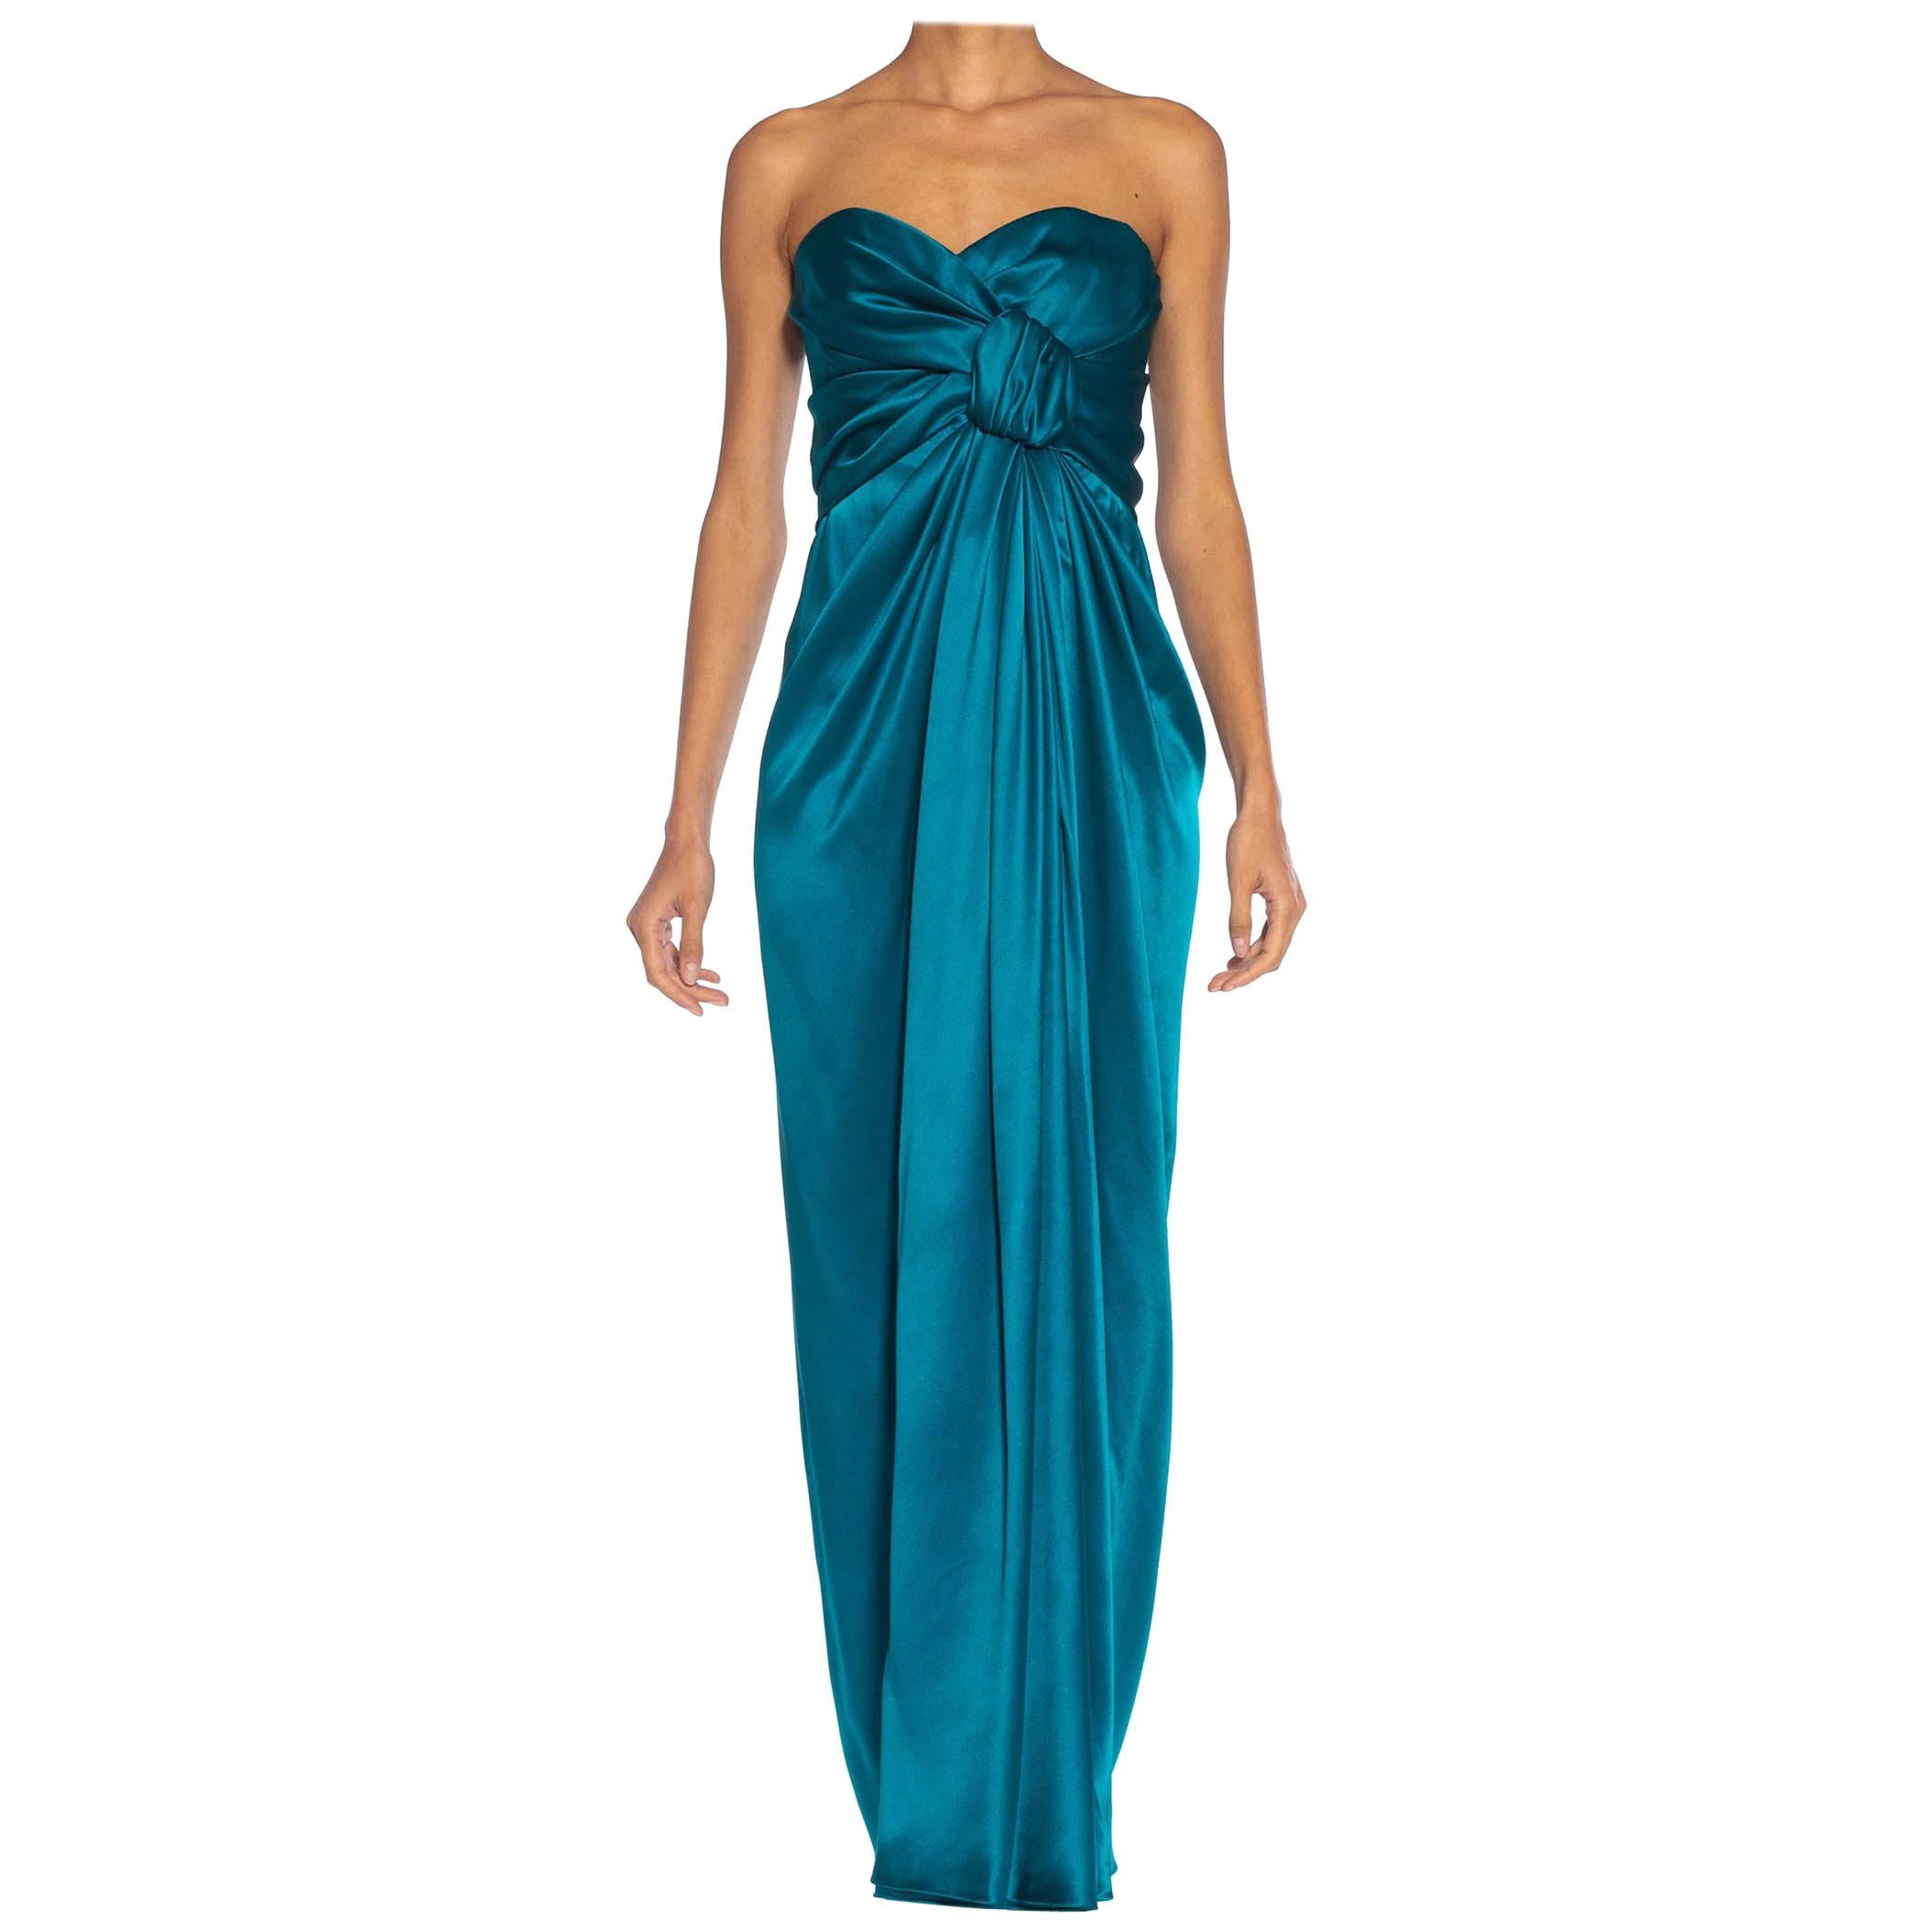 1980S YVES SAINT LAURENT Teal Haute Couture Silk Satin Draped Strpless Gown For Sale